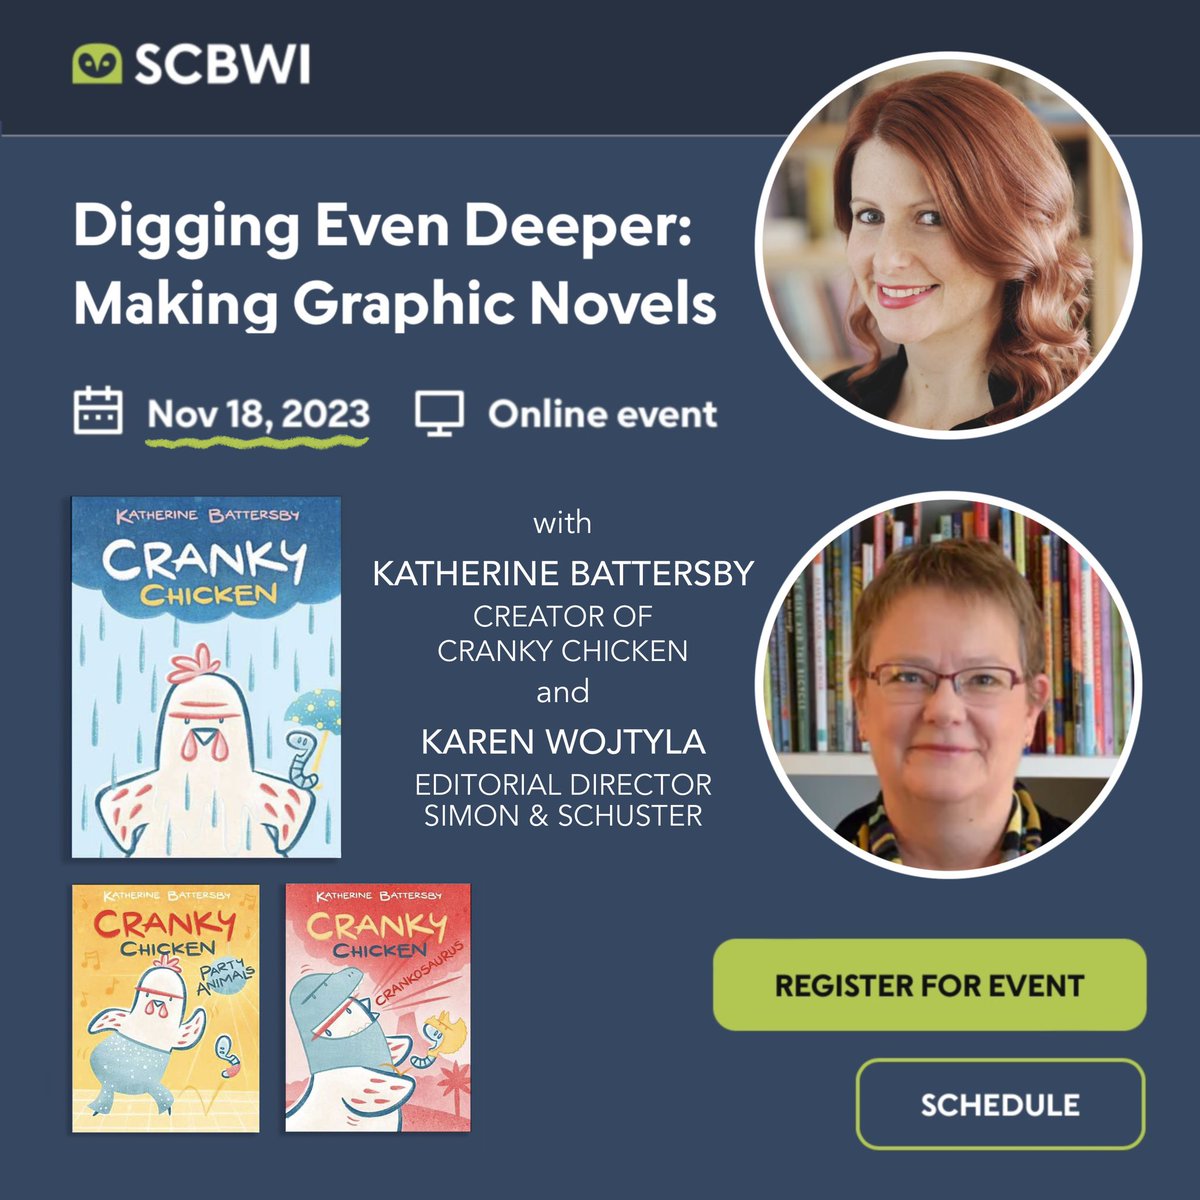 I’m running an online Graphic Novel workshop for adults on Nov 18th, hosted by @SCBWICanadaEast. It’s perfect for anyone who dreams of writing a GN, or for illustrators who’d like to work with their own story idea. We’ll delve right into the craft of creating graphic novels and…